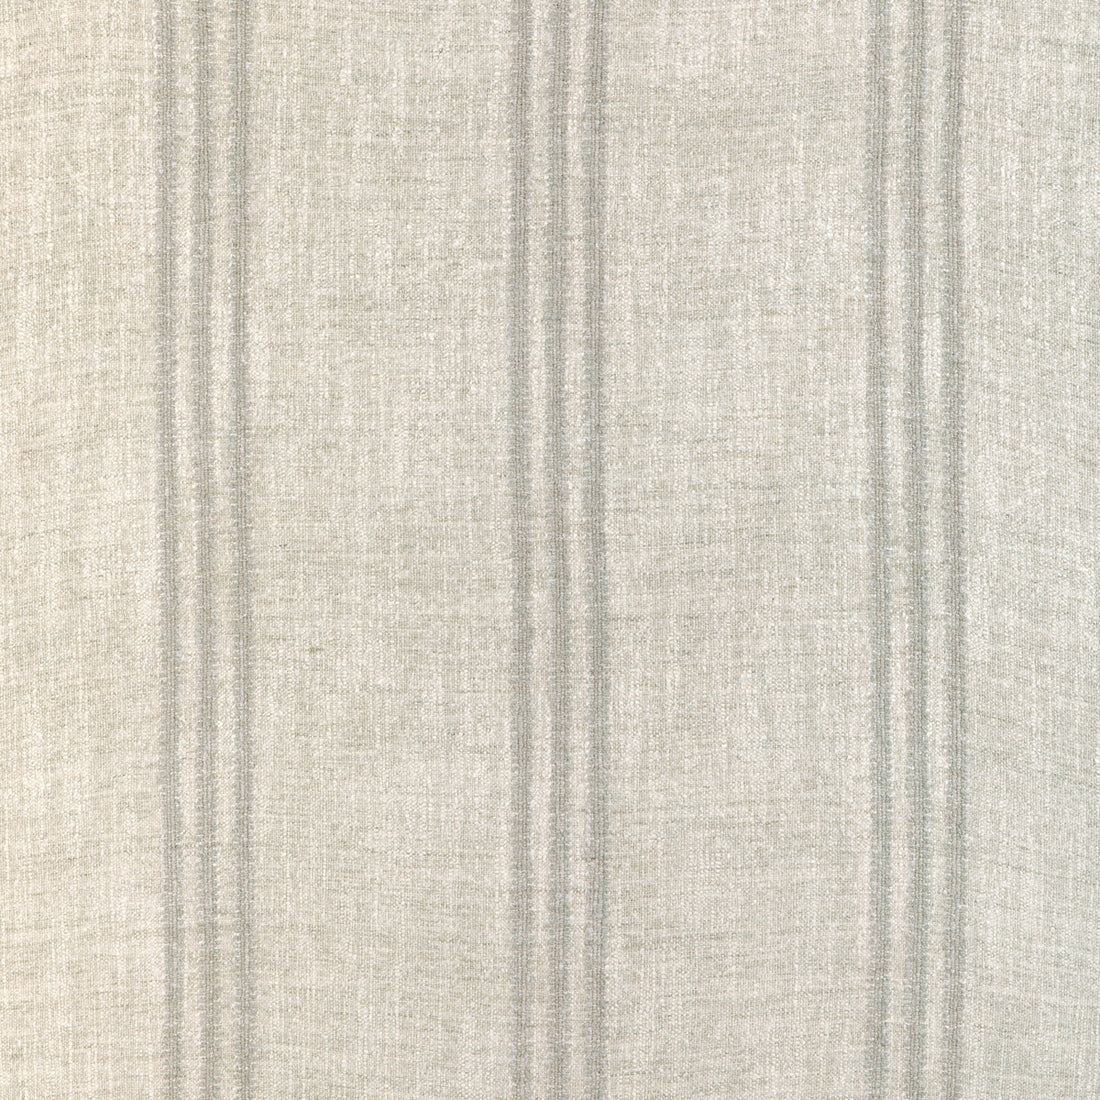 Karphi Stripe fabric in dove color - pattern 35860.11.0 - by Kravet Couture in the Atelier Weaves collection